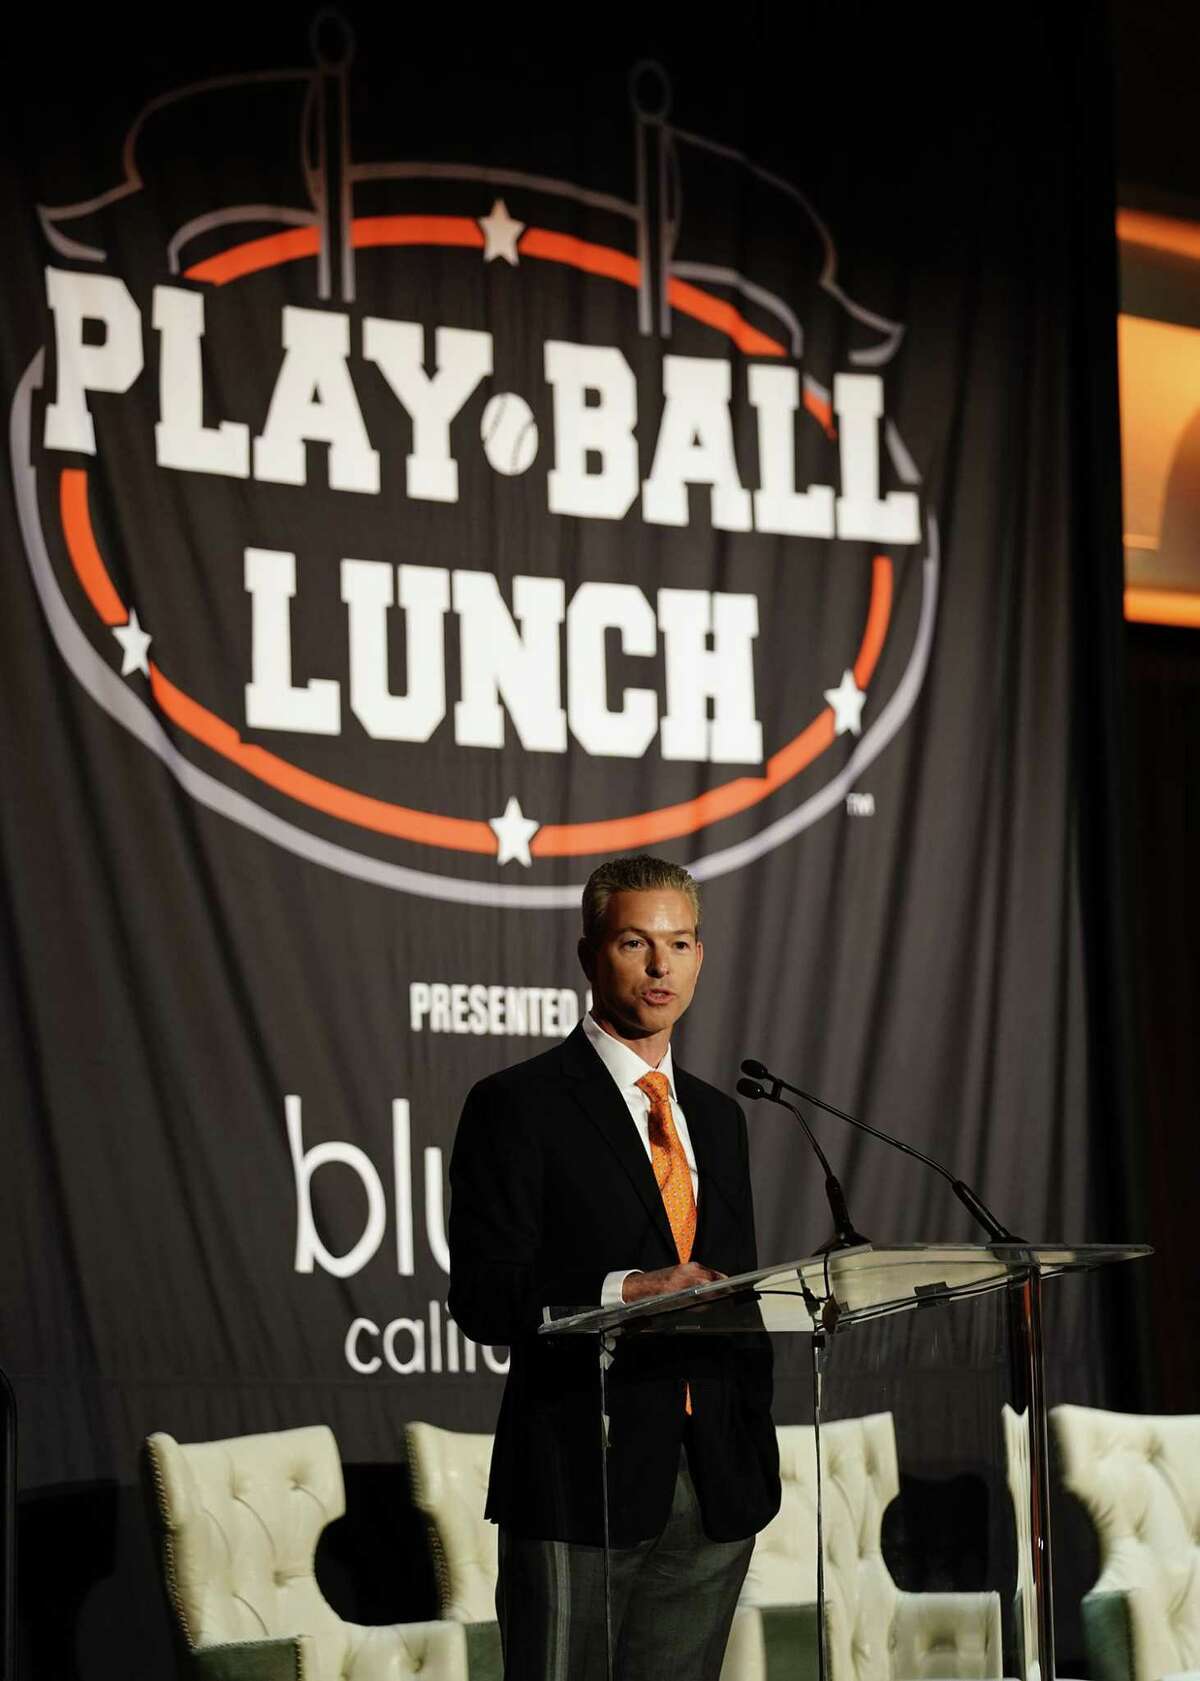 Robert Dean, San Francisco Giants interim CEO and Giants board member, speaks at the annual Play Ball Lunch at the Fairmont Hotel with Giants players and Jr. Giants kids on Monday March 25, 2019.